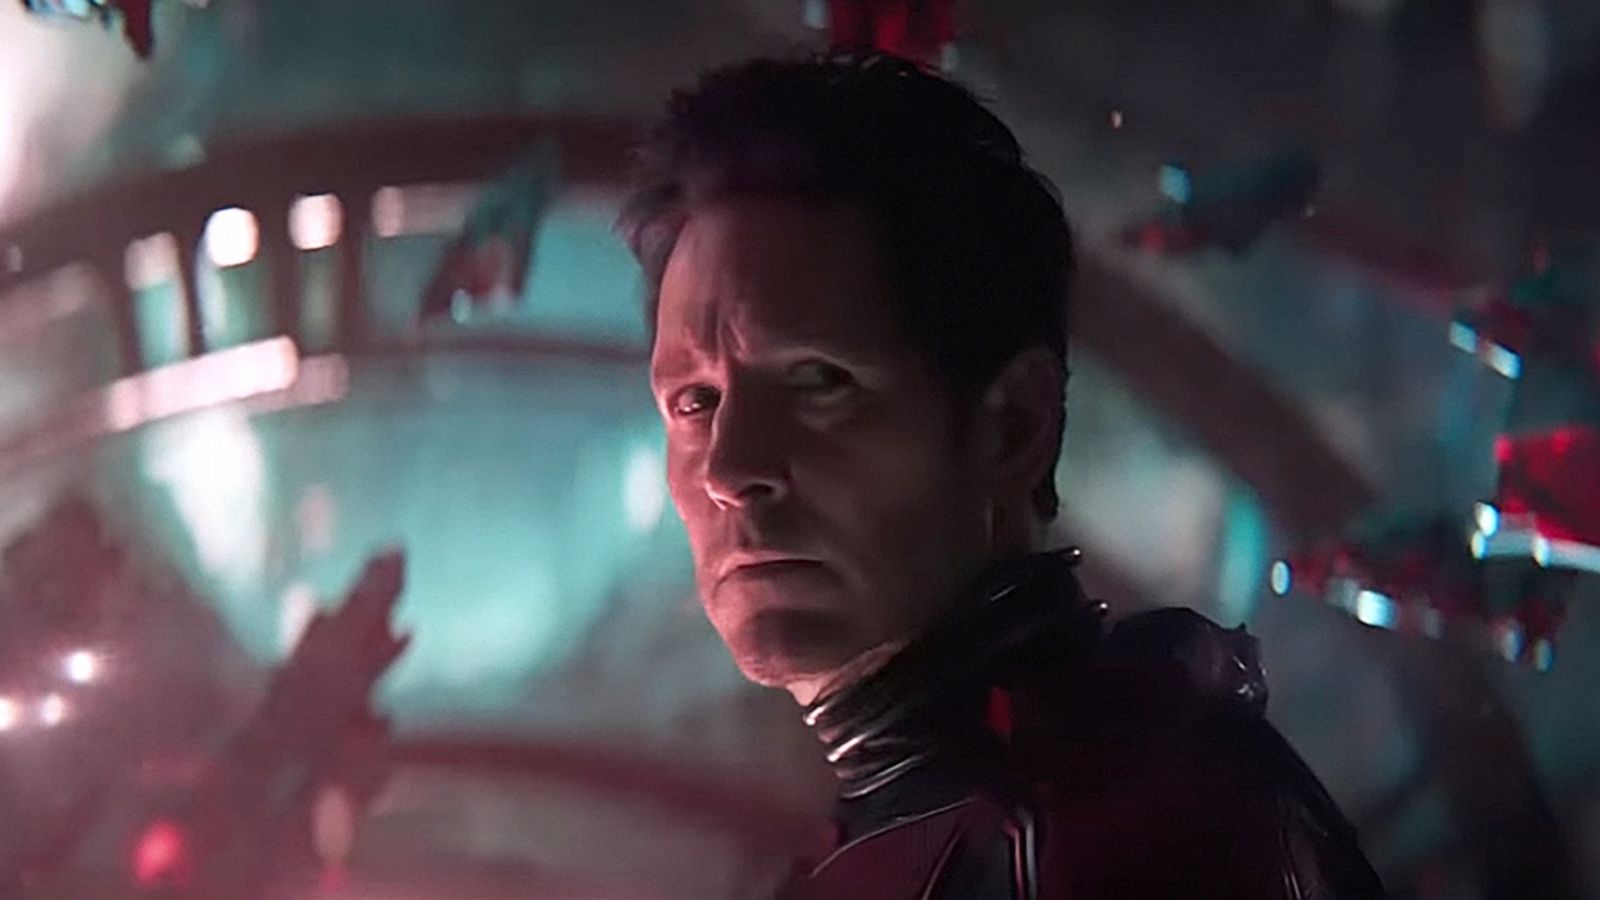 New Ant-Man 3 Trailer Revealed at D23 Expo